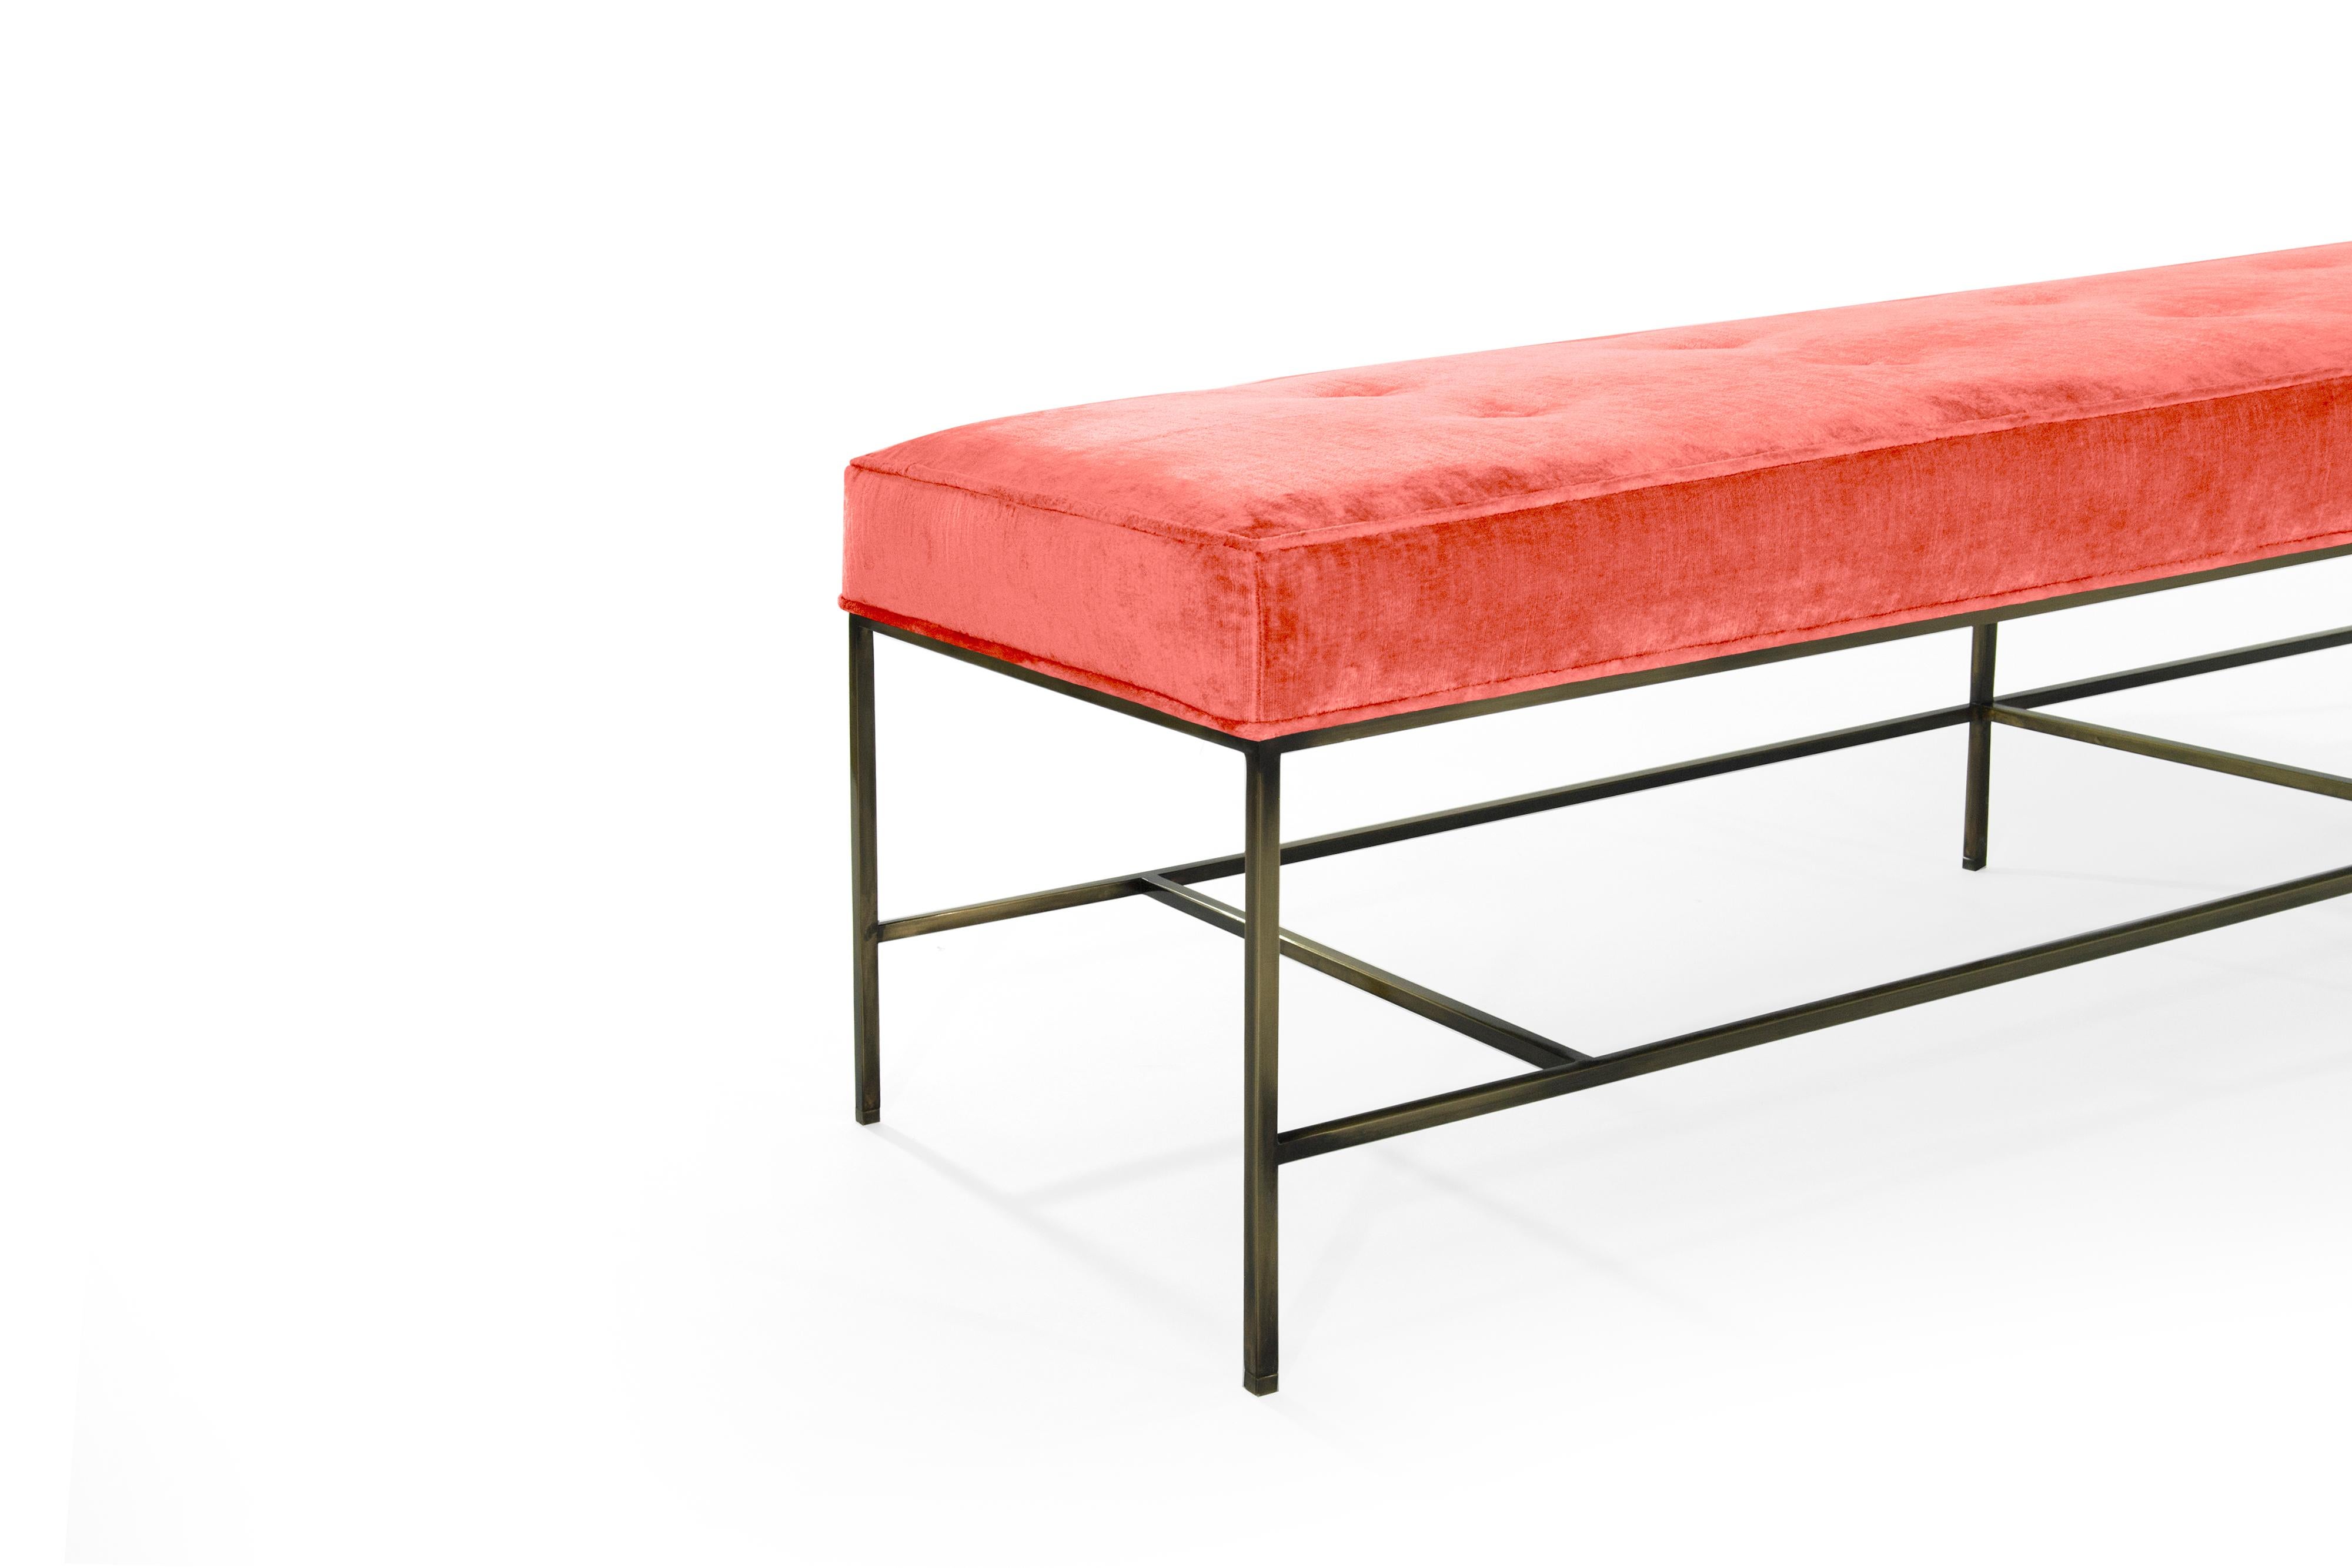 American Stamford Modern's Architectural Bronze Bench in Coral Chenille